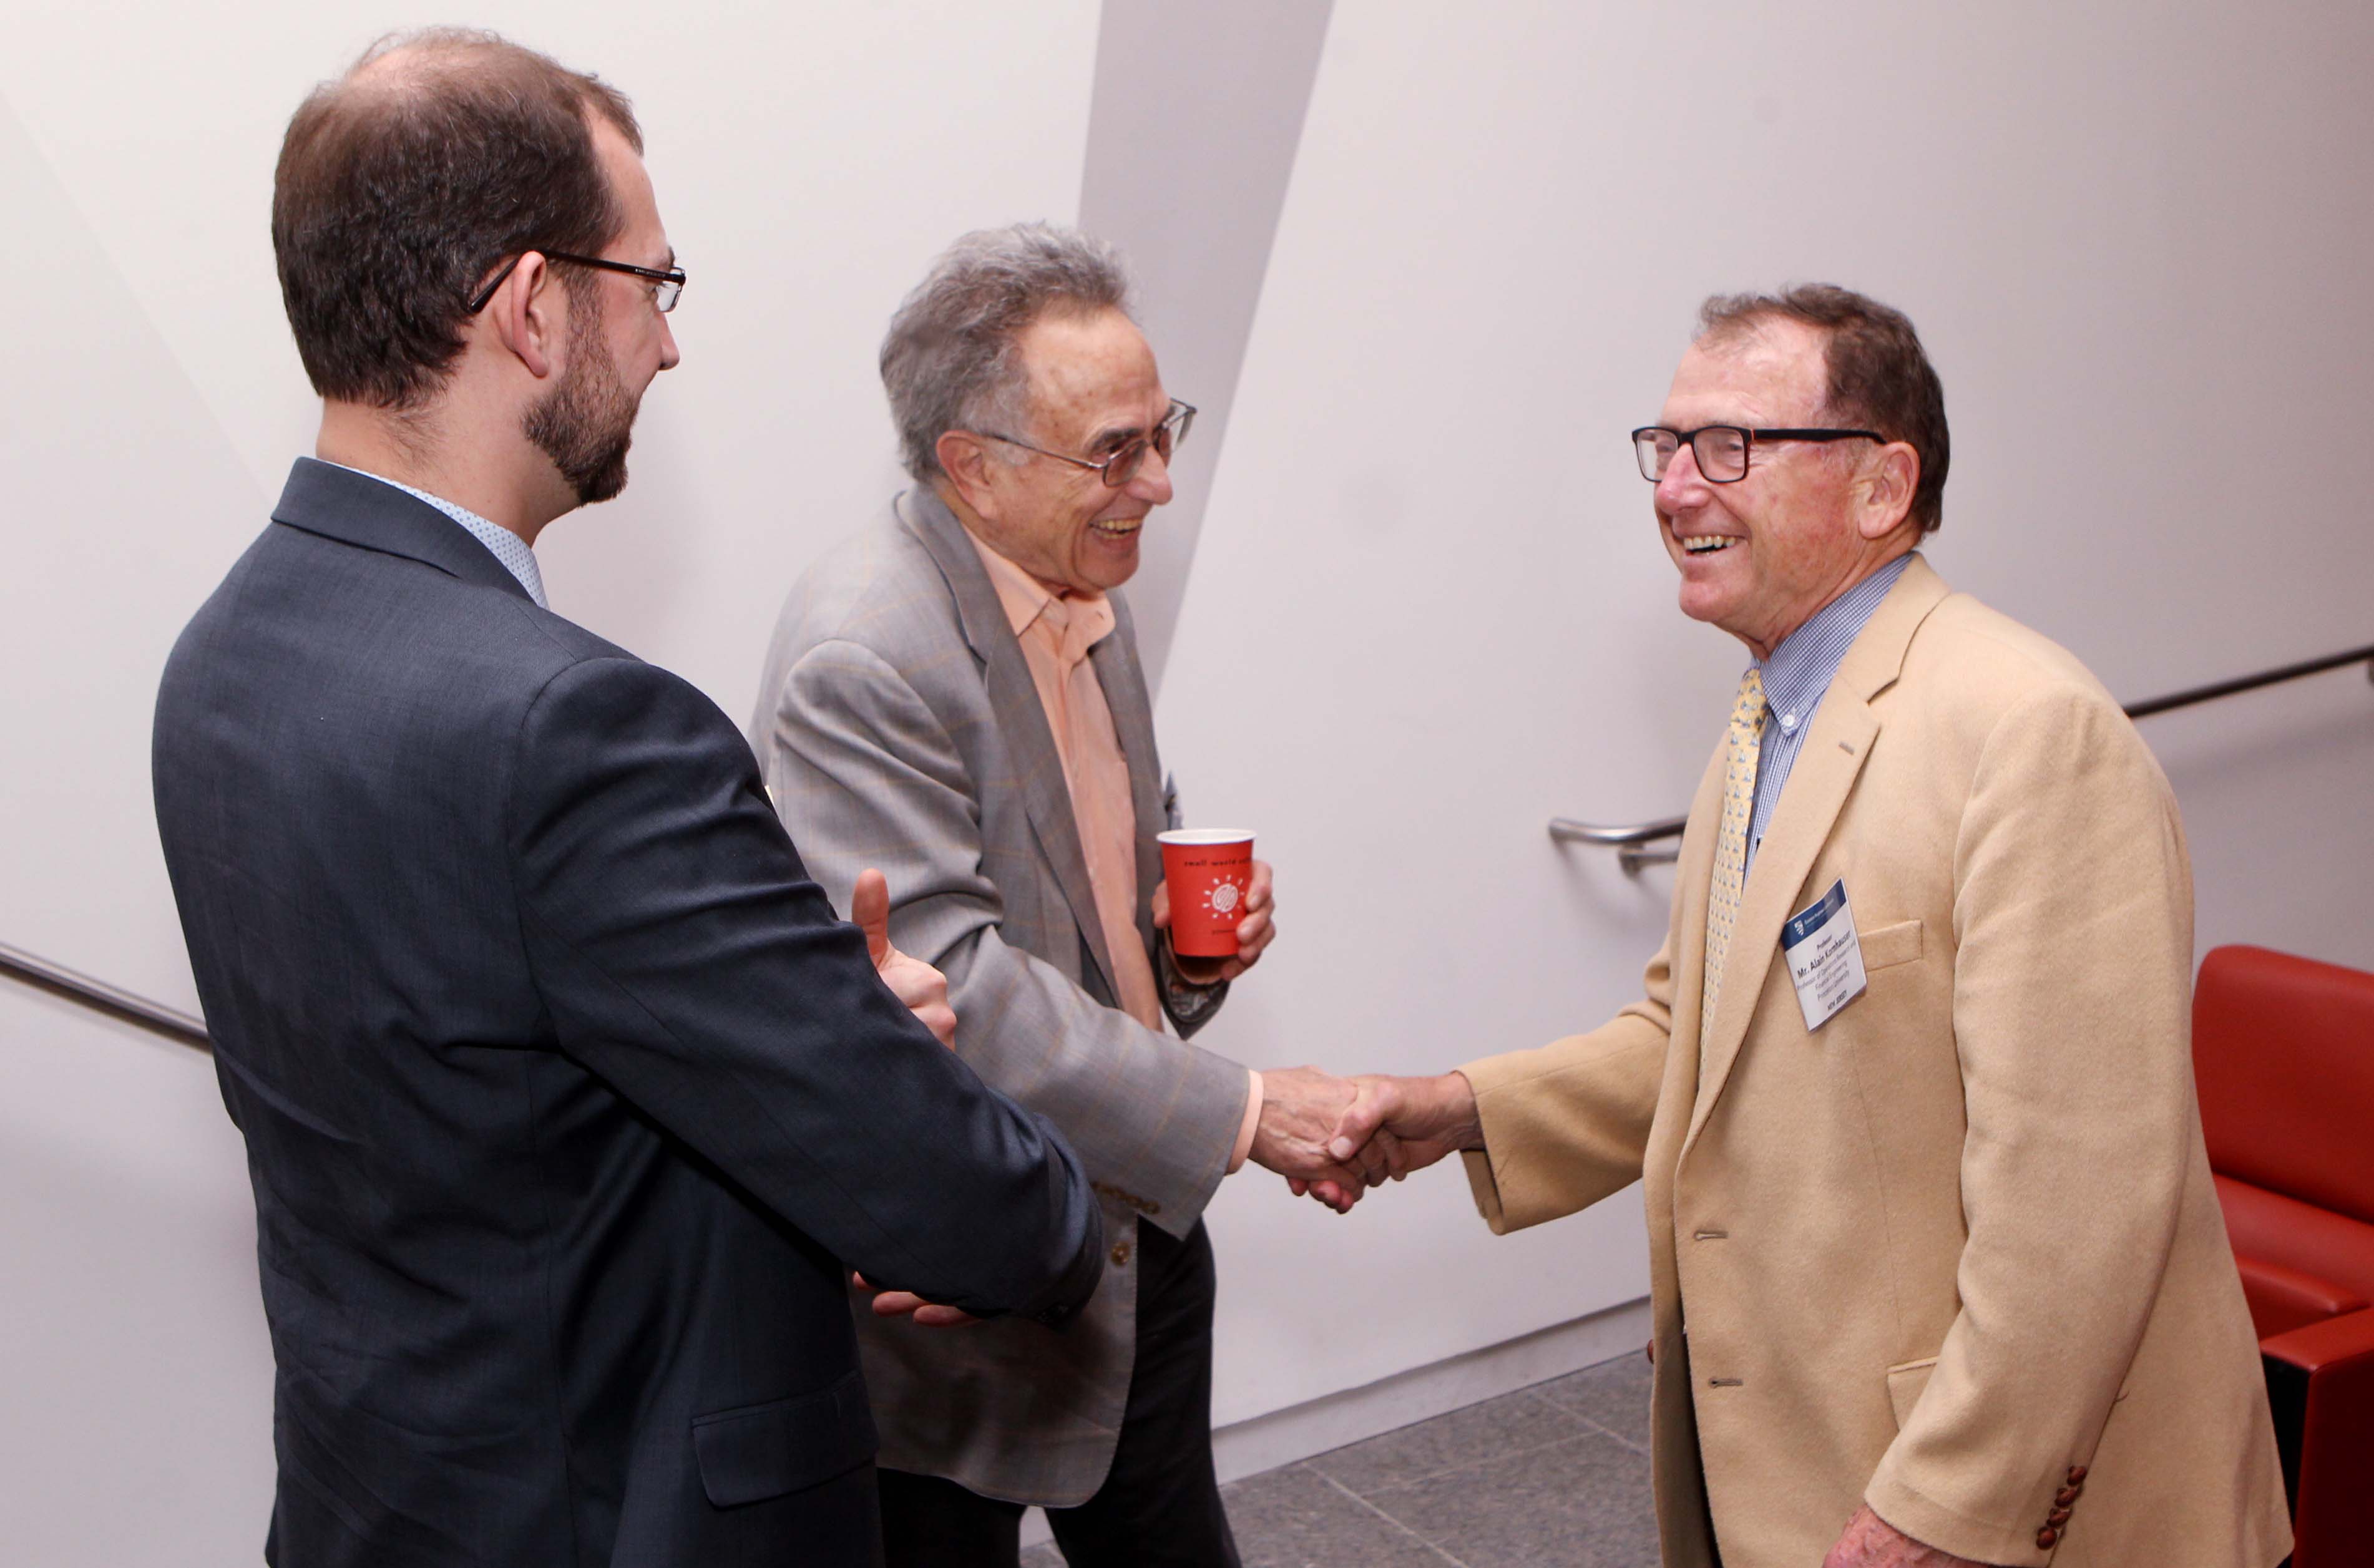 Princeton faculty members Robert Socolow (center), professor of mechanical and aerospace engineering, emeritus, and Alain Kornhauser (right), professor of operations research and financial engineering, shaking hands in this photo, were among the speakers at the event.  Photo byFrank Wojciechowski